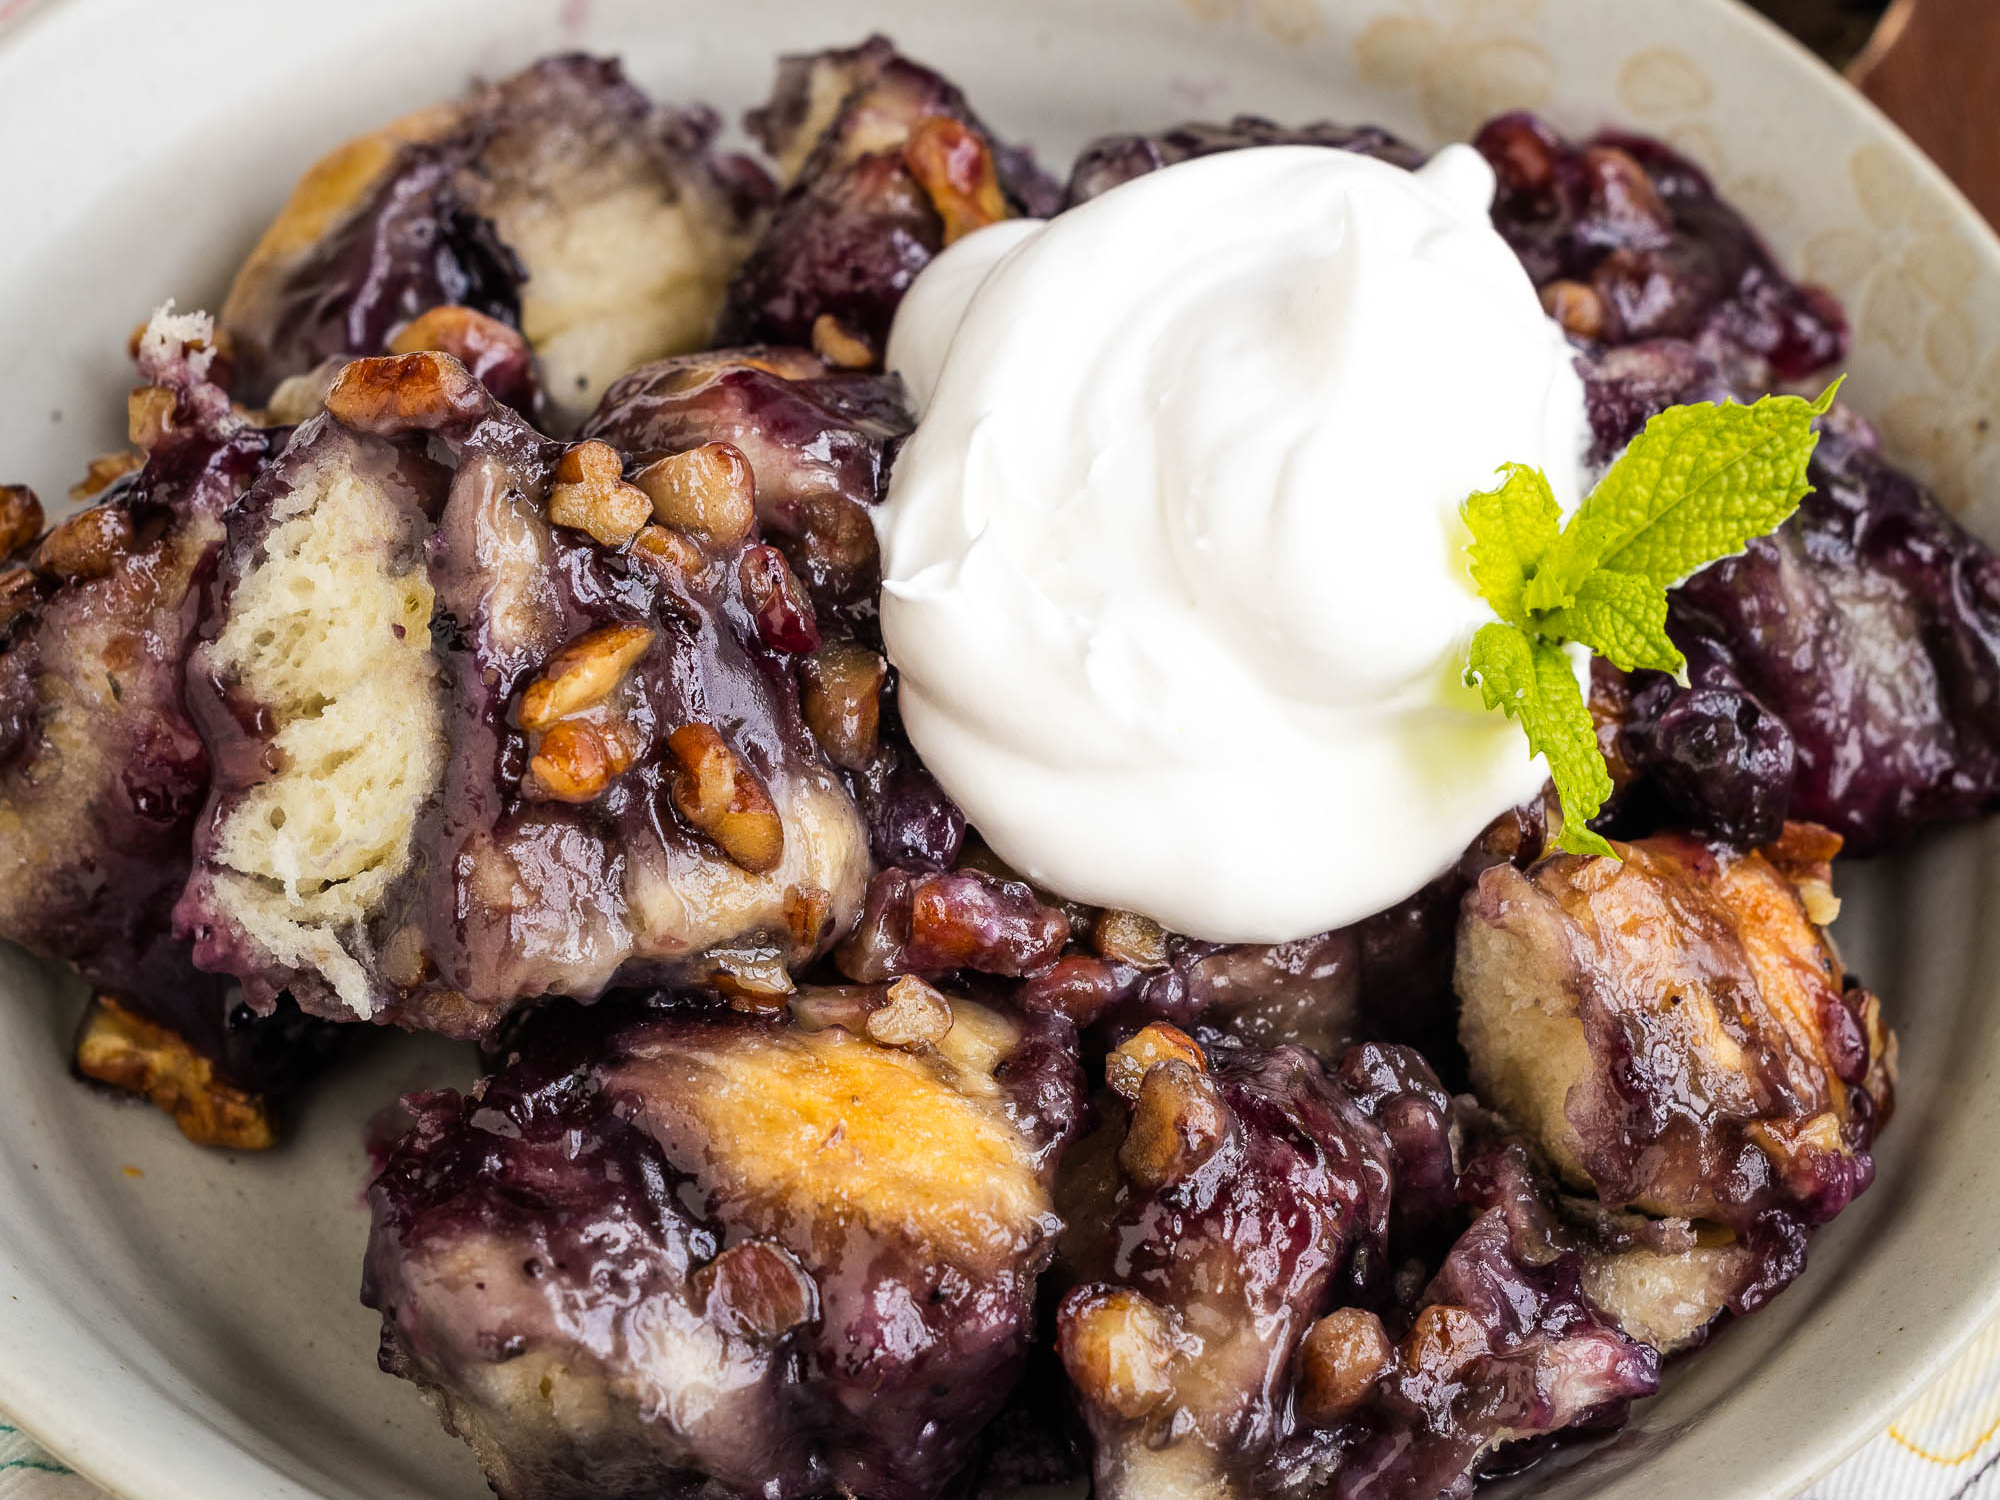 A plate of blueberry monkey bread topped with a dollop of whipped cream and garnished with a mint leaf.